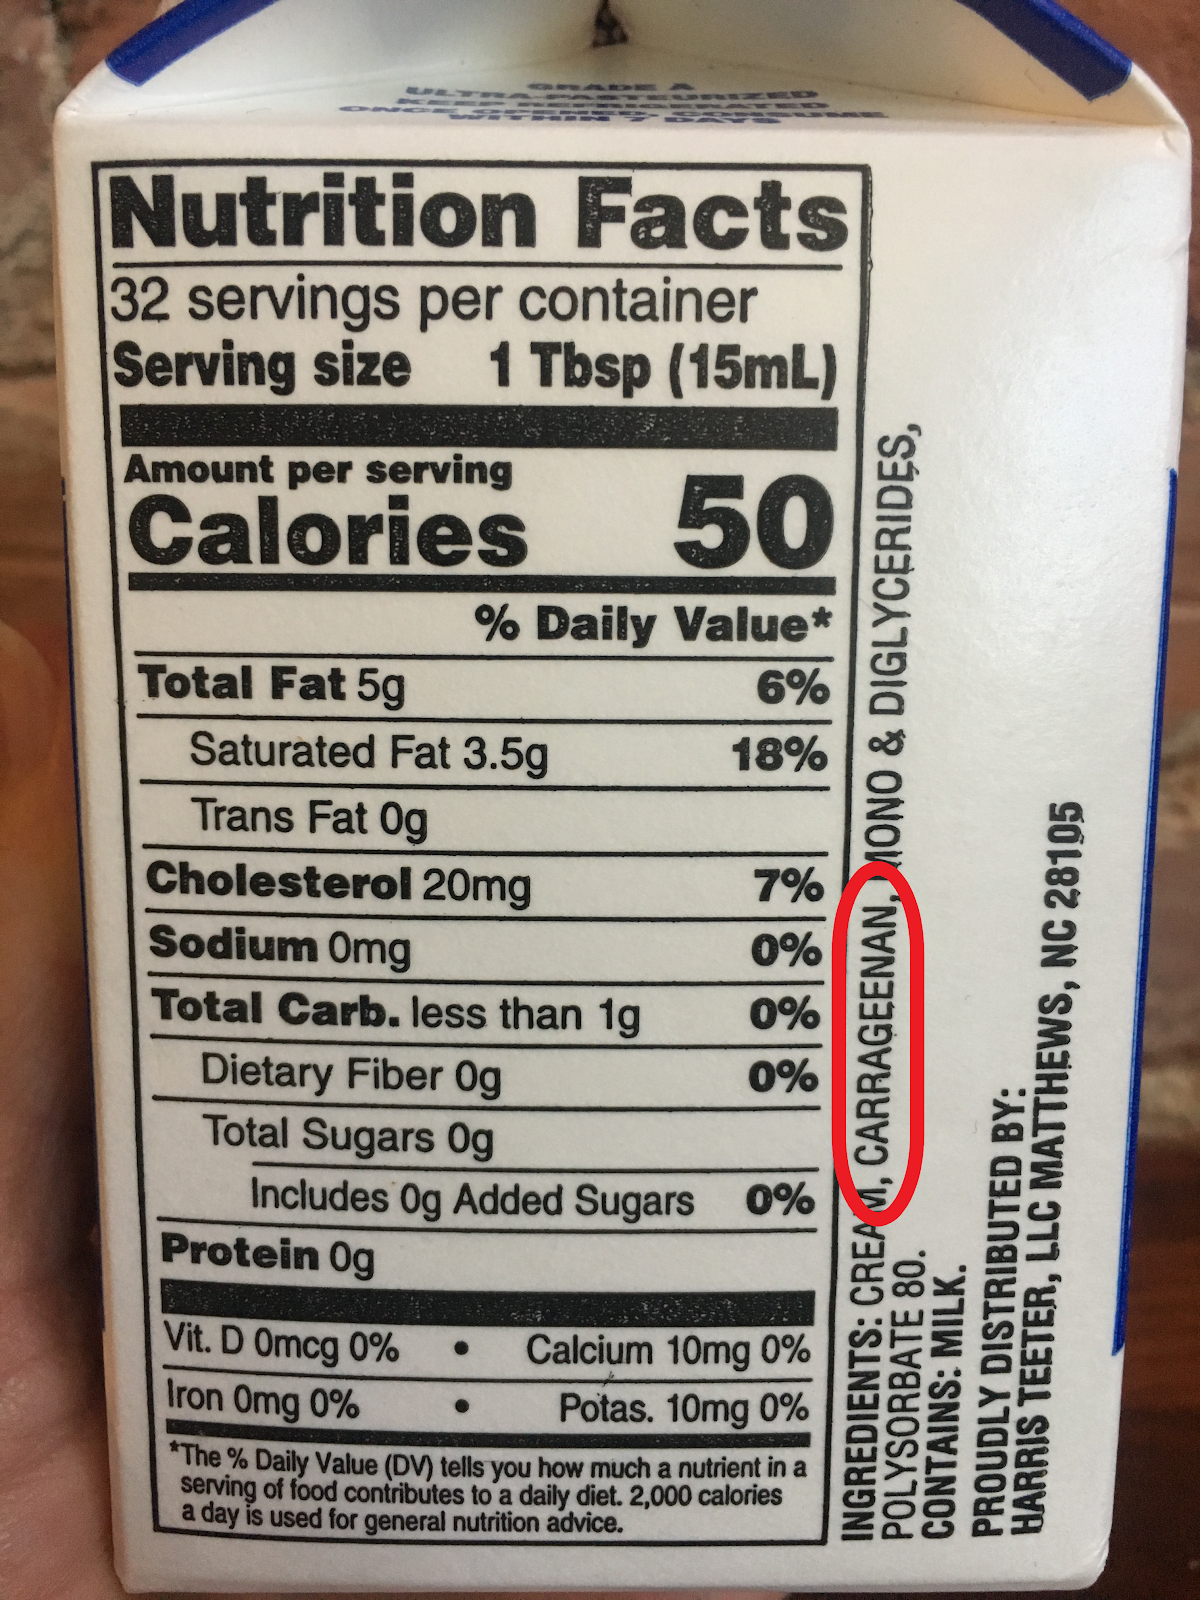 Carrageenan: Get out of my food!